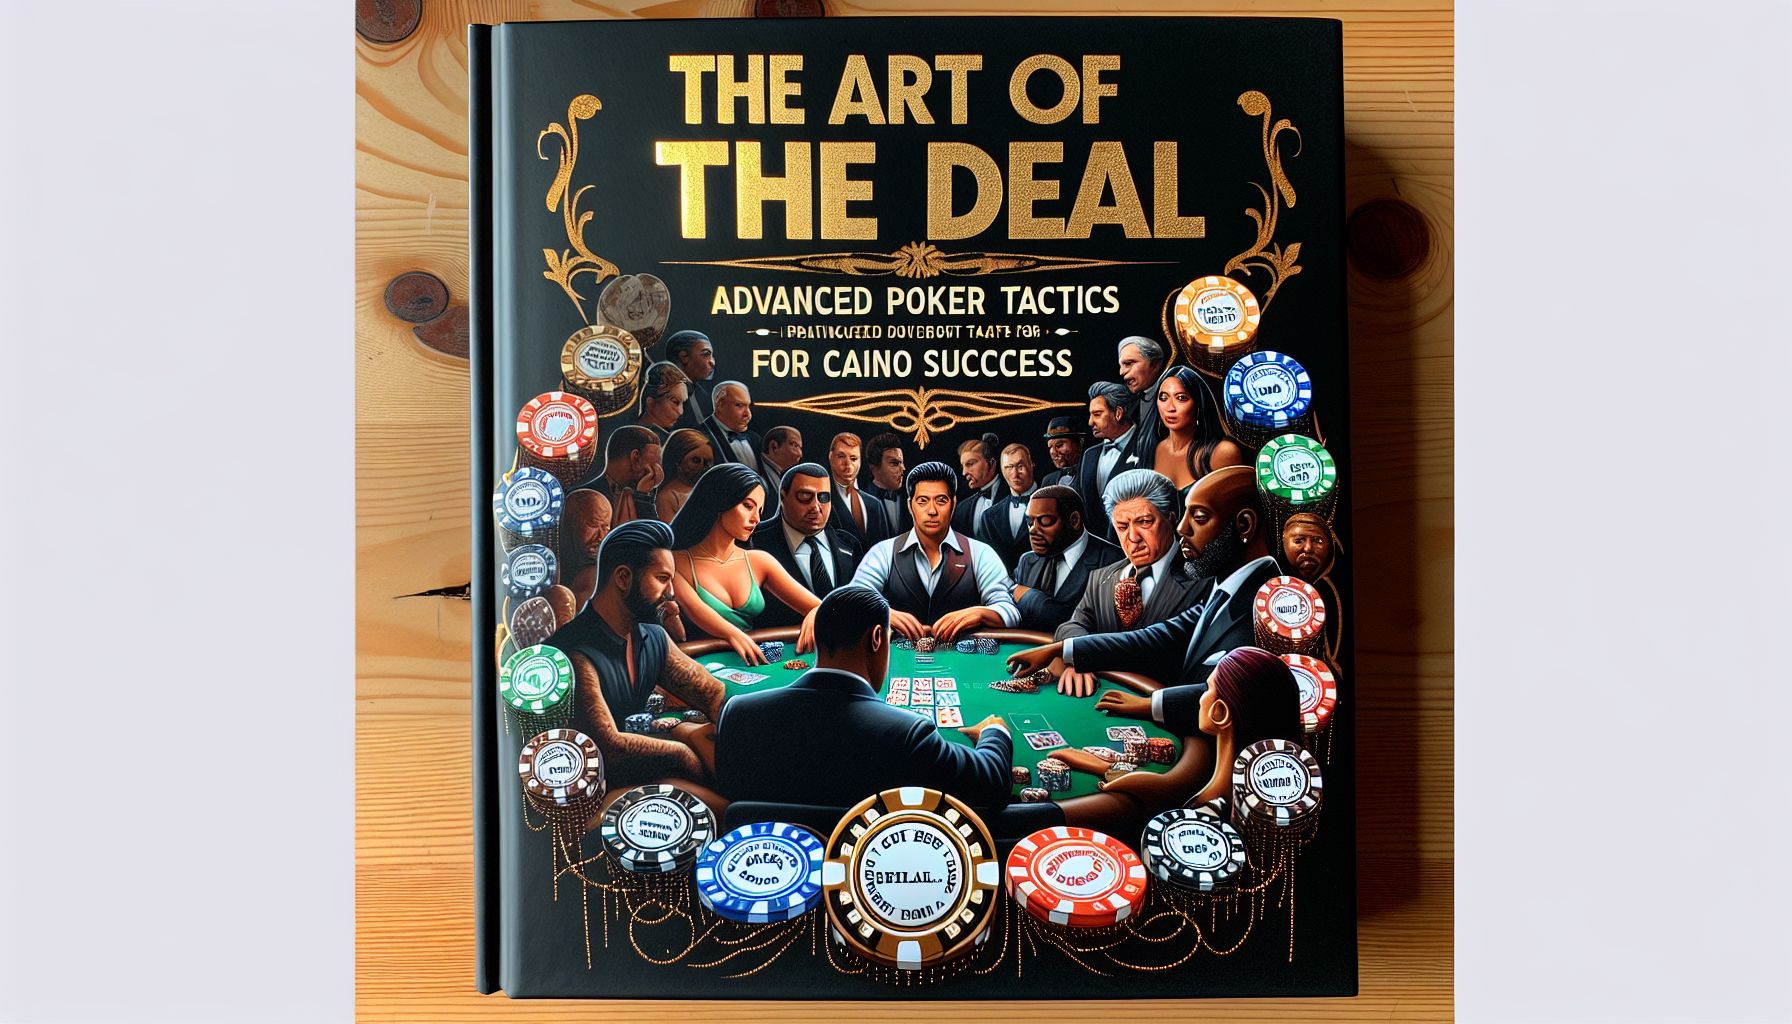 The Art of the Deal: Advanced Poker Tactics for Casino Success